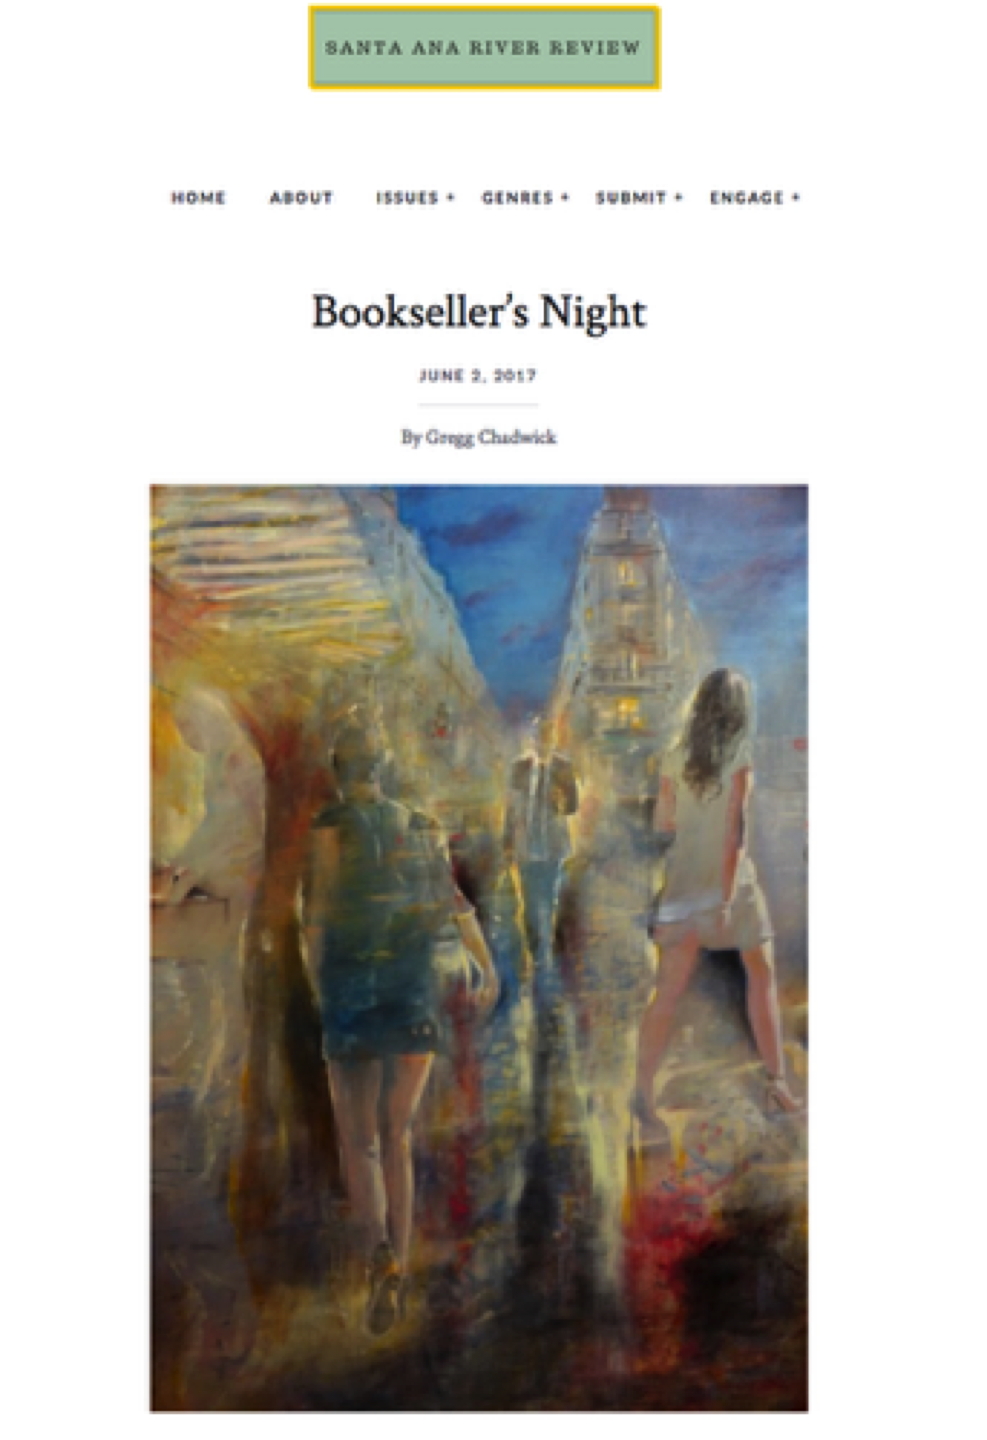 Gregg Chadwick's Bookseller's Night in the Santa Ana River Review